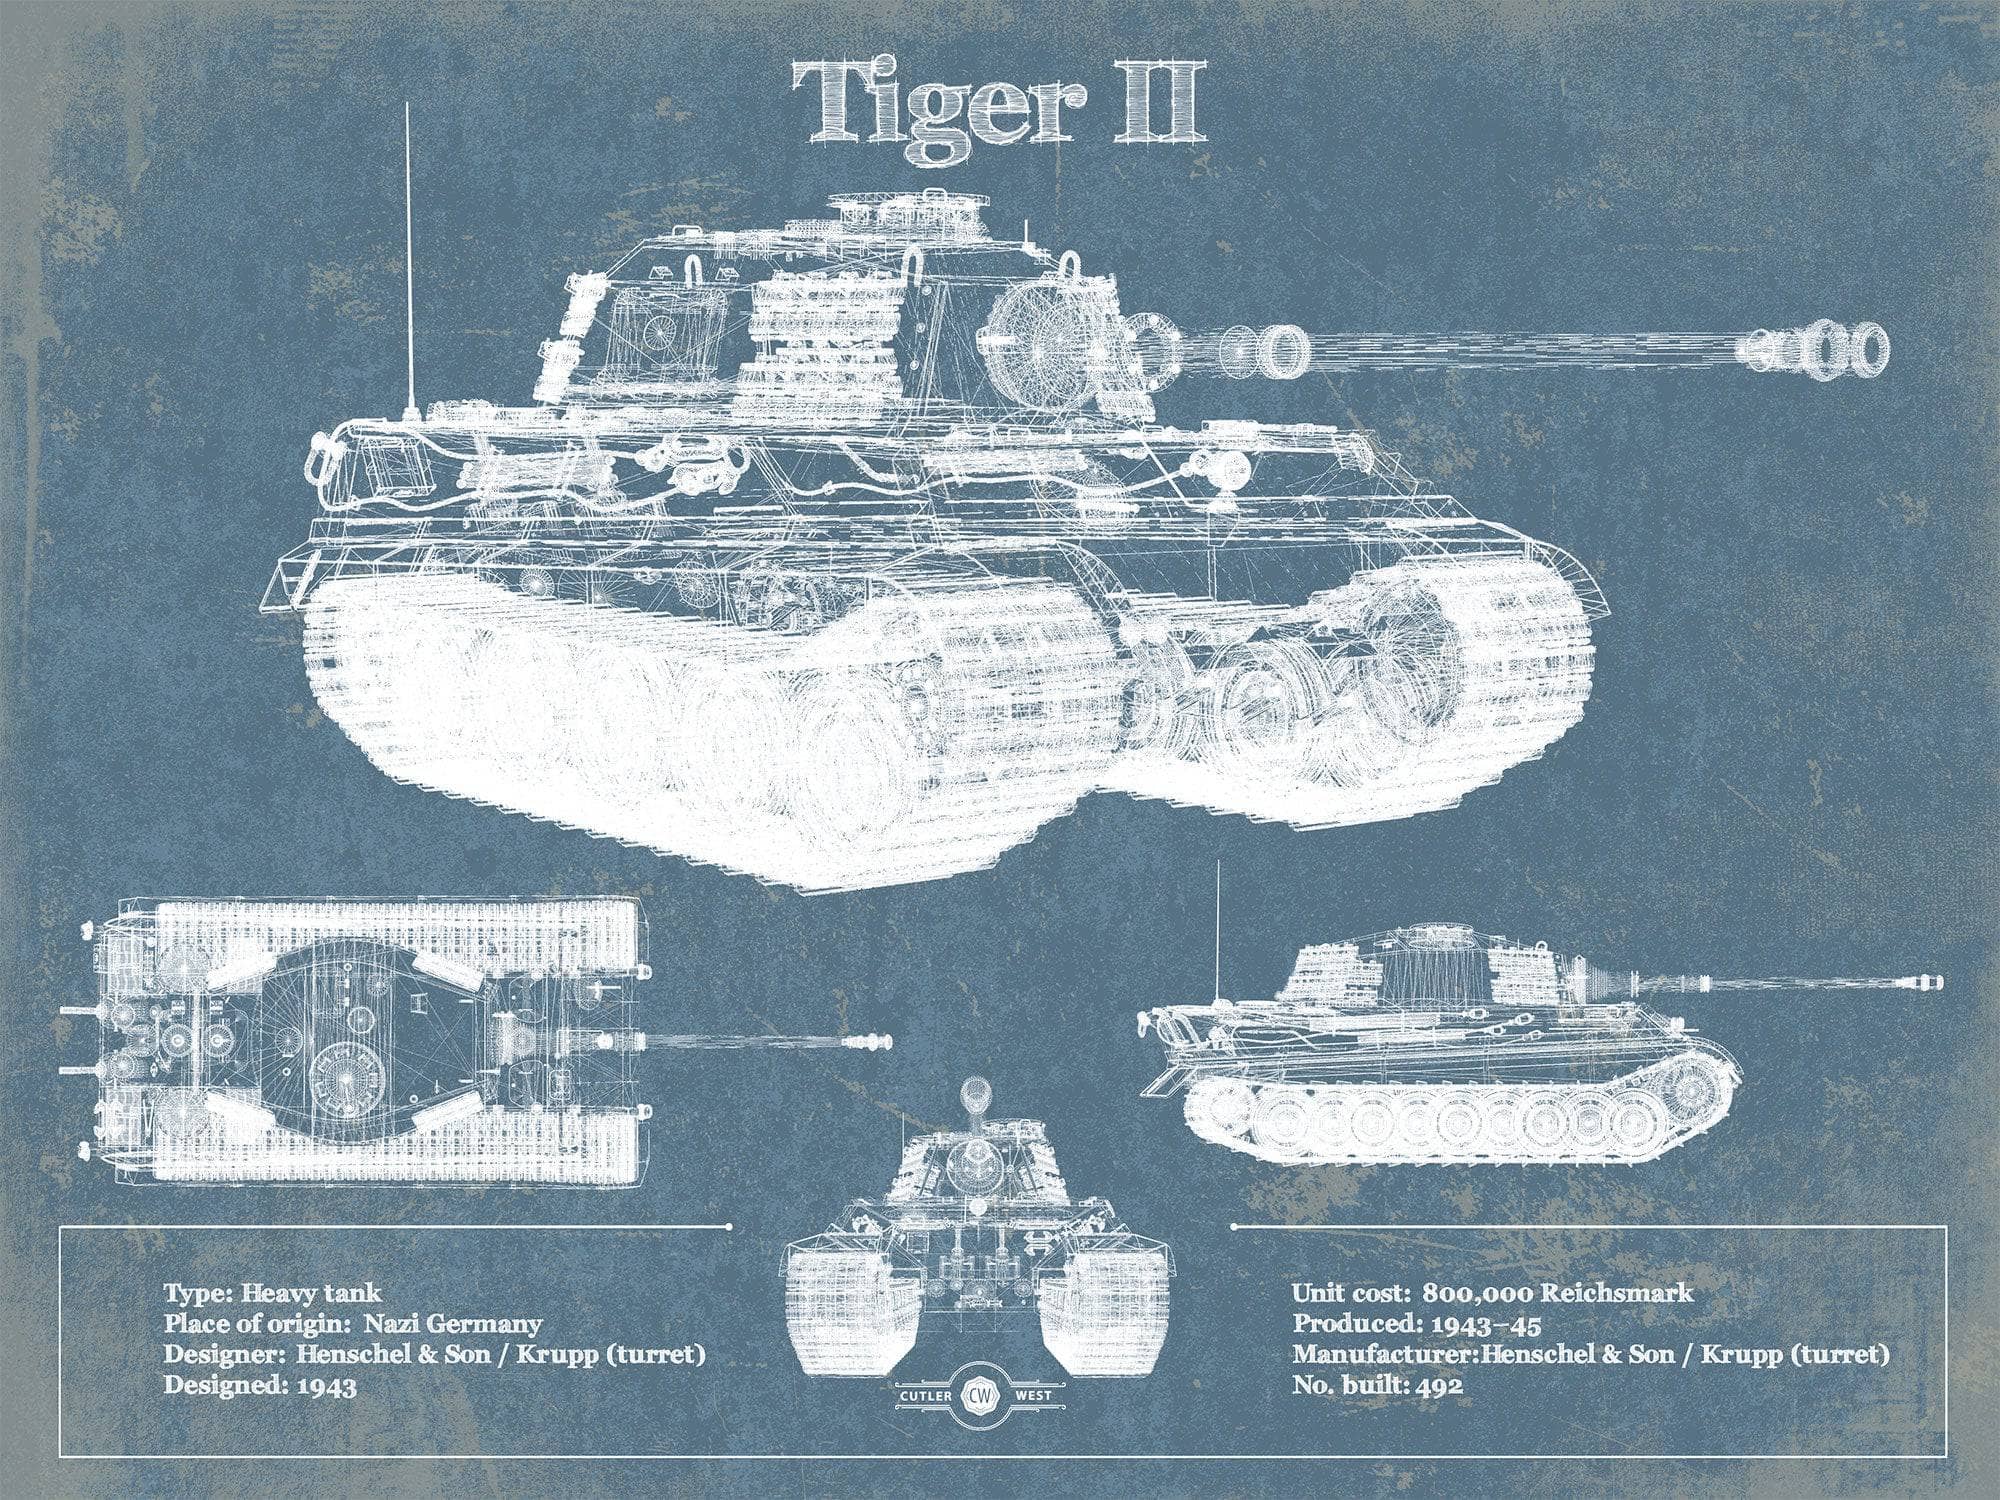 Cutler West Military Weapons Collection 14" x 11" / Unframed Tiger II Vintage German Tank Military Print 845000232_24664